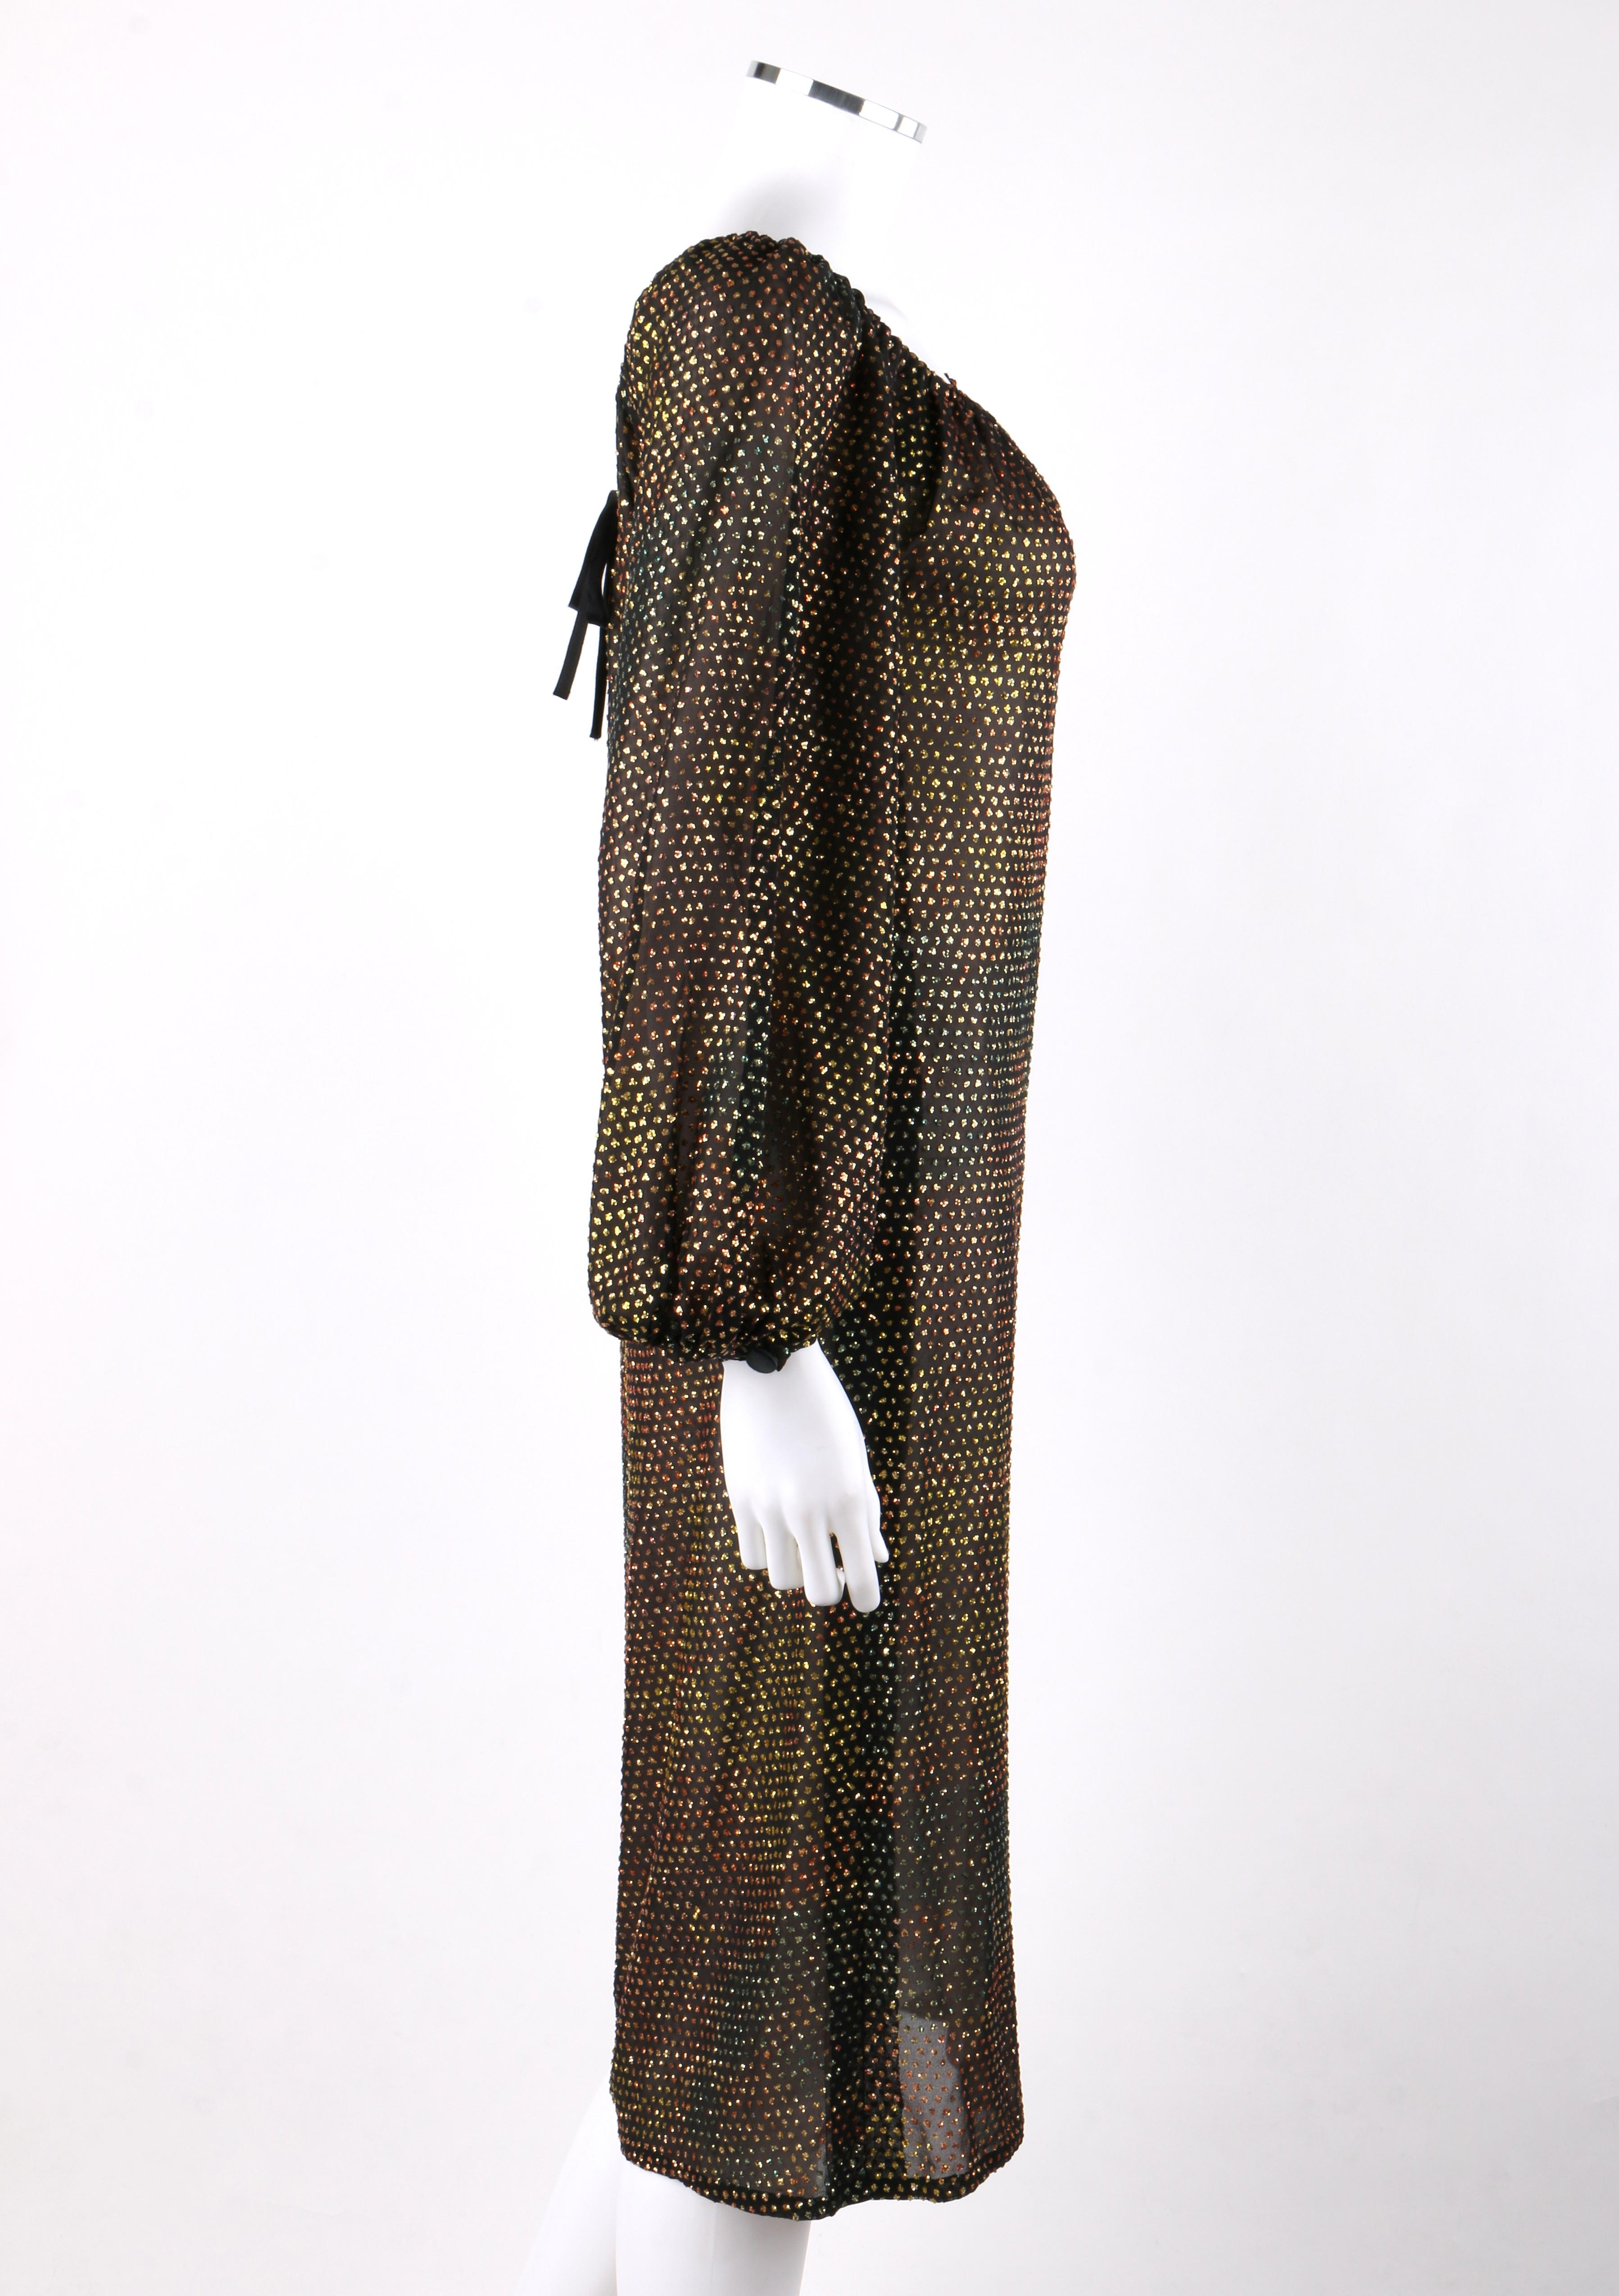 GIVENCHY HAUTE COUTURE c.1970s Black Gold-Rainbow Bishop Sleeve Shift Dress In Good Condition For Sale In Thiensville, WI